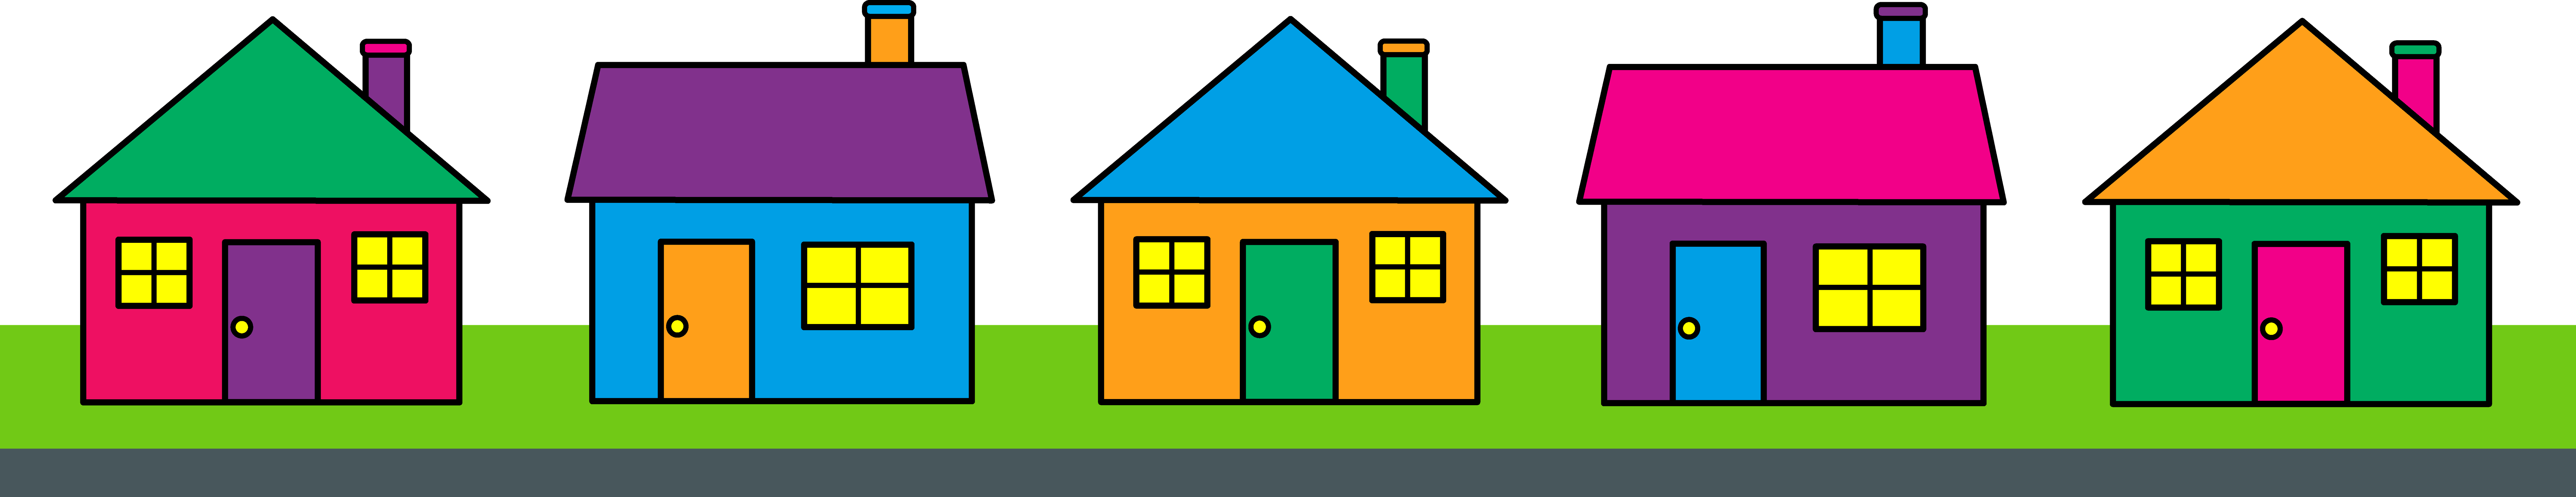 Download House In Row S Clipart House Clip Art House - Kutcha House - Free  Transparent PNG Clipart Images Download